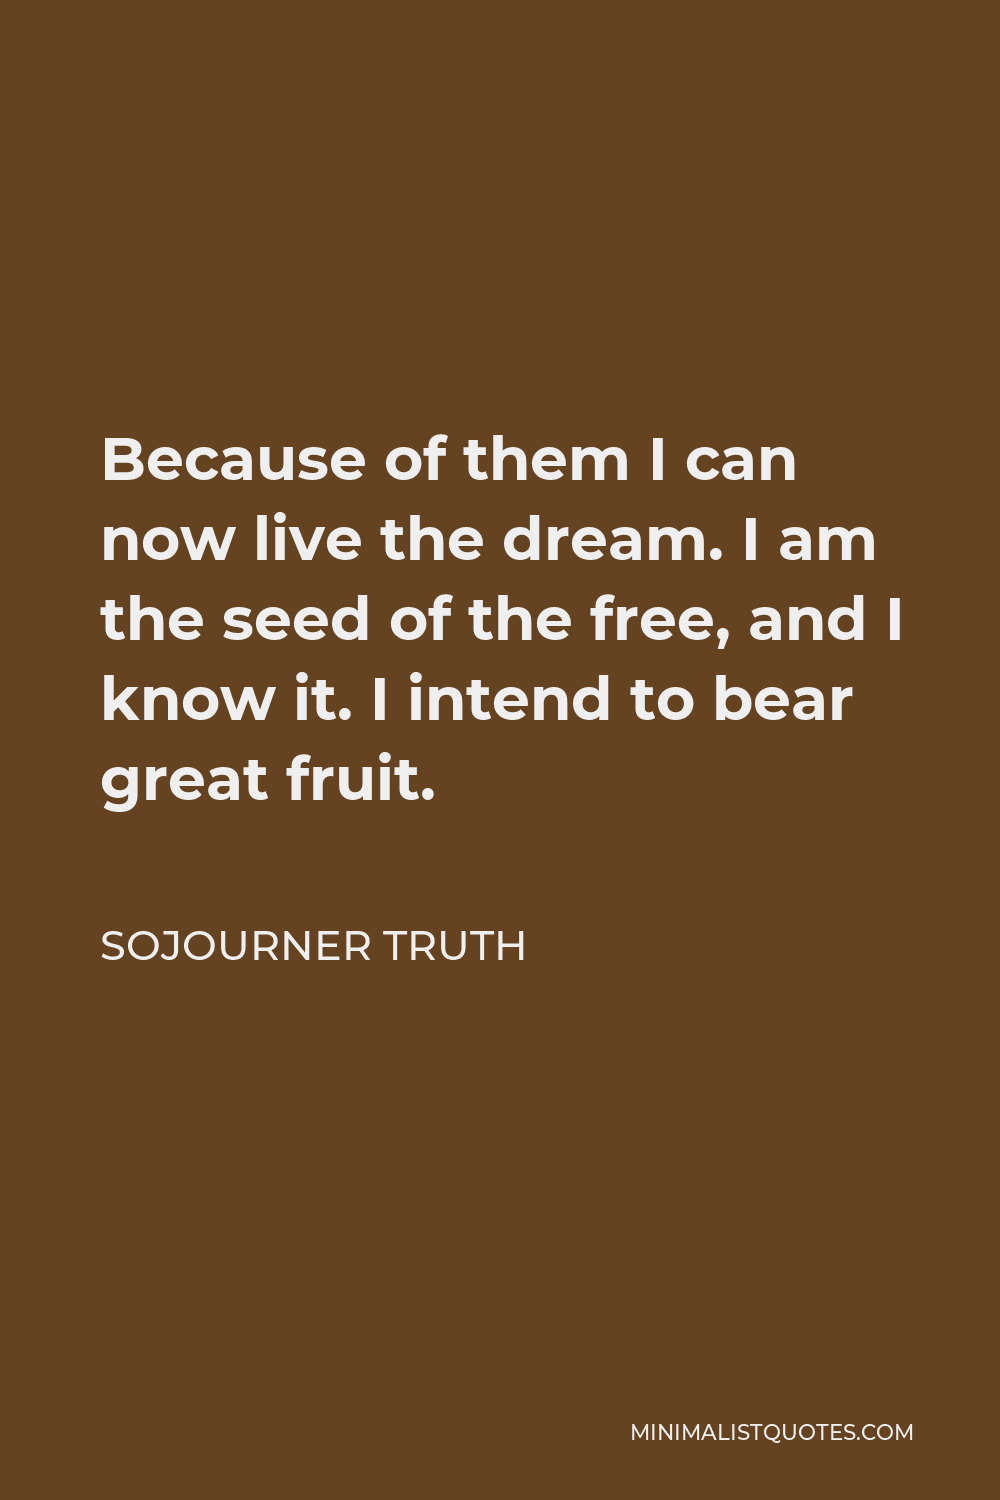 Sojourner Truth Quote - Because of them I can now live the dream. I am the seed of the free, and I know it. I intend to bear great fruit.